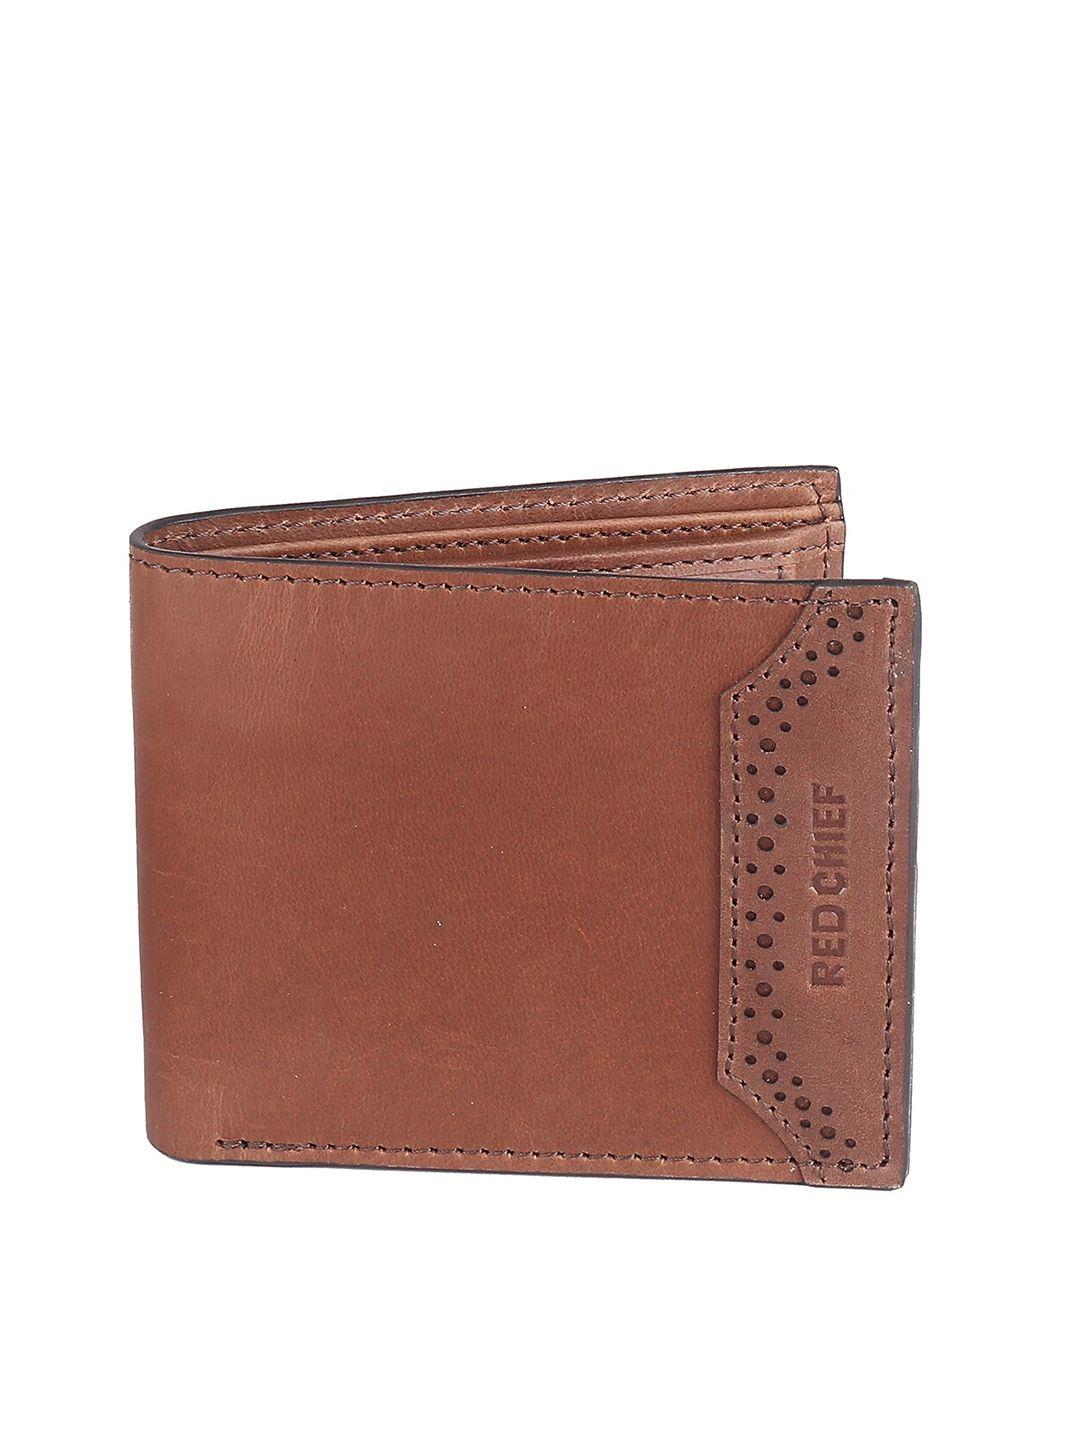 red-chief-men-brown-leather-two-fold-wallet